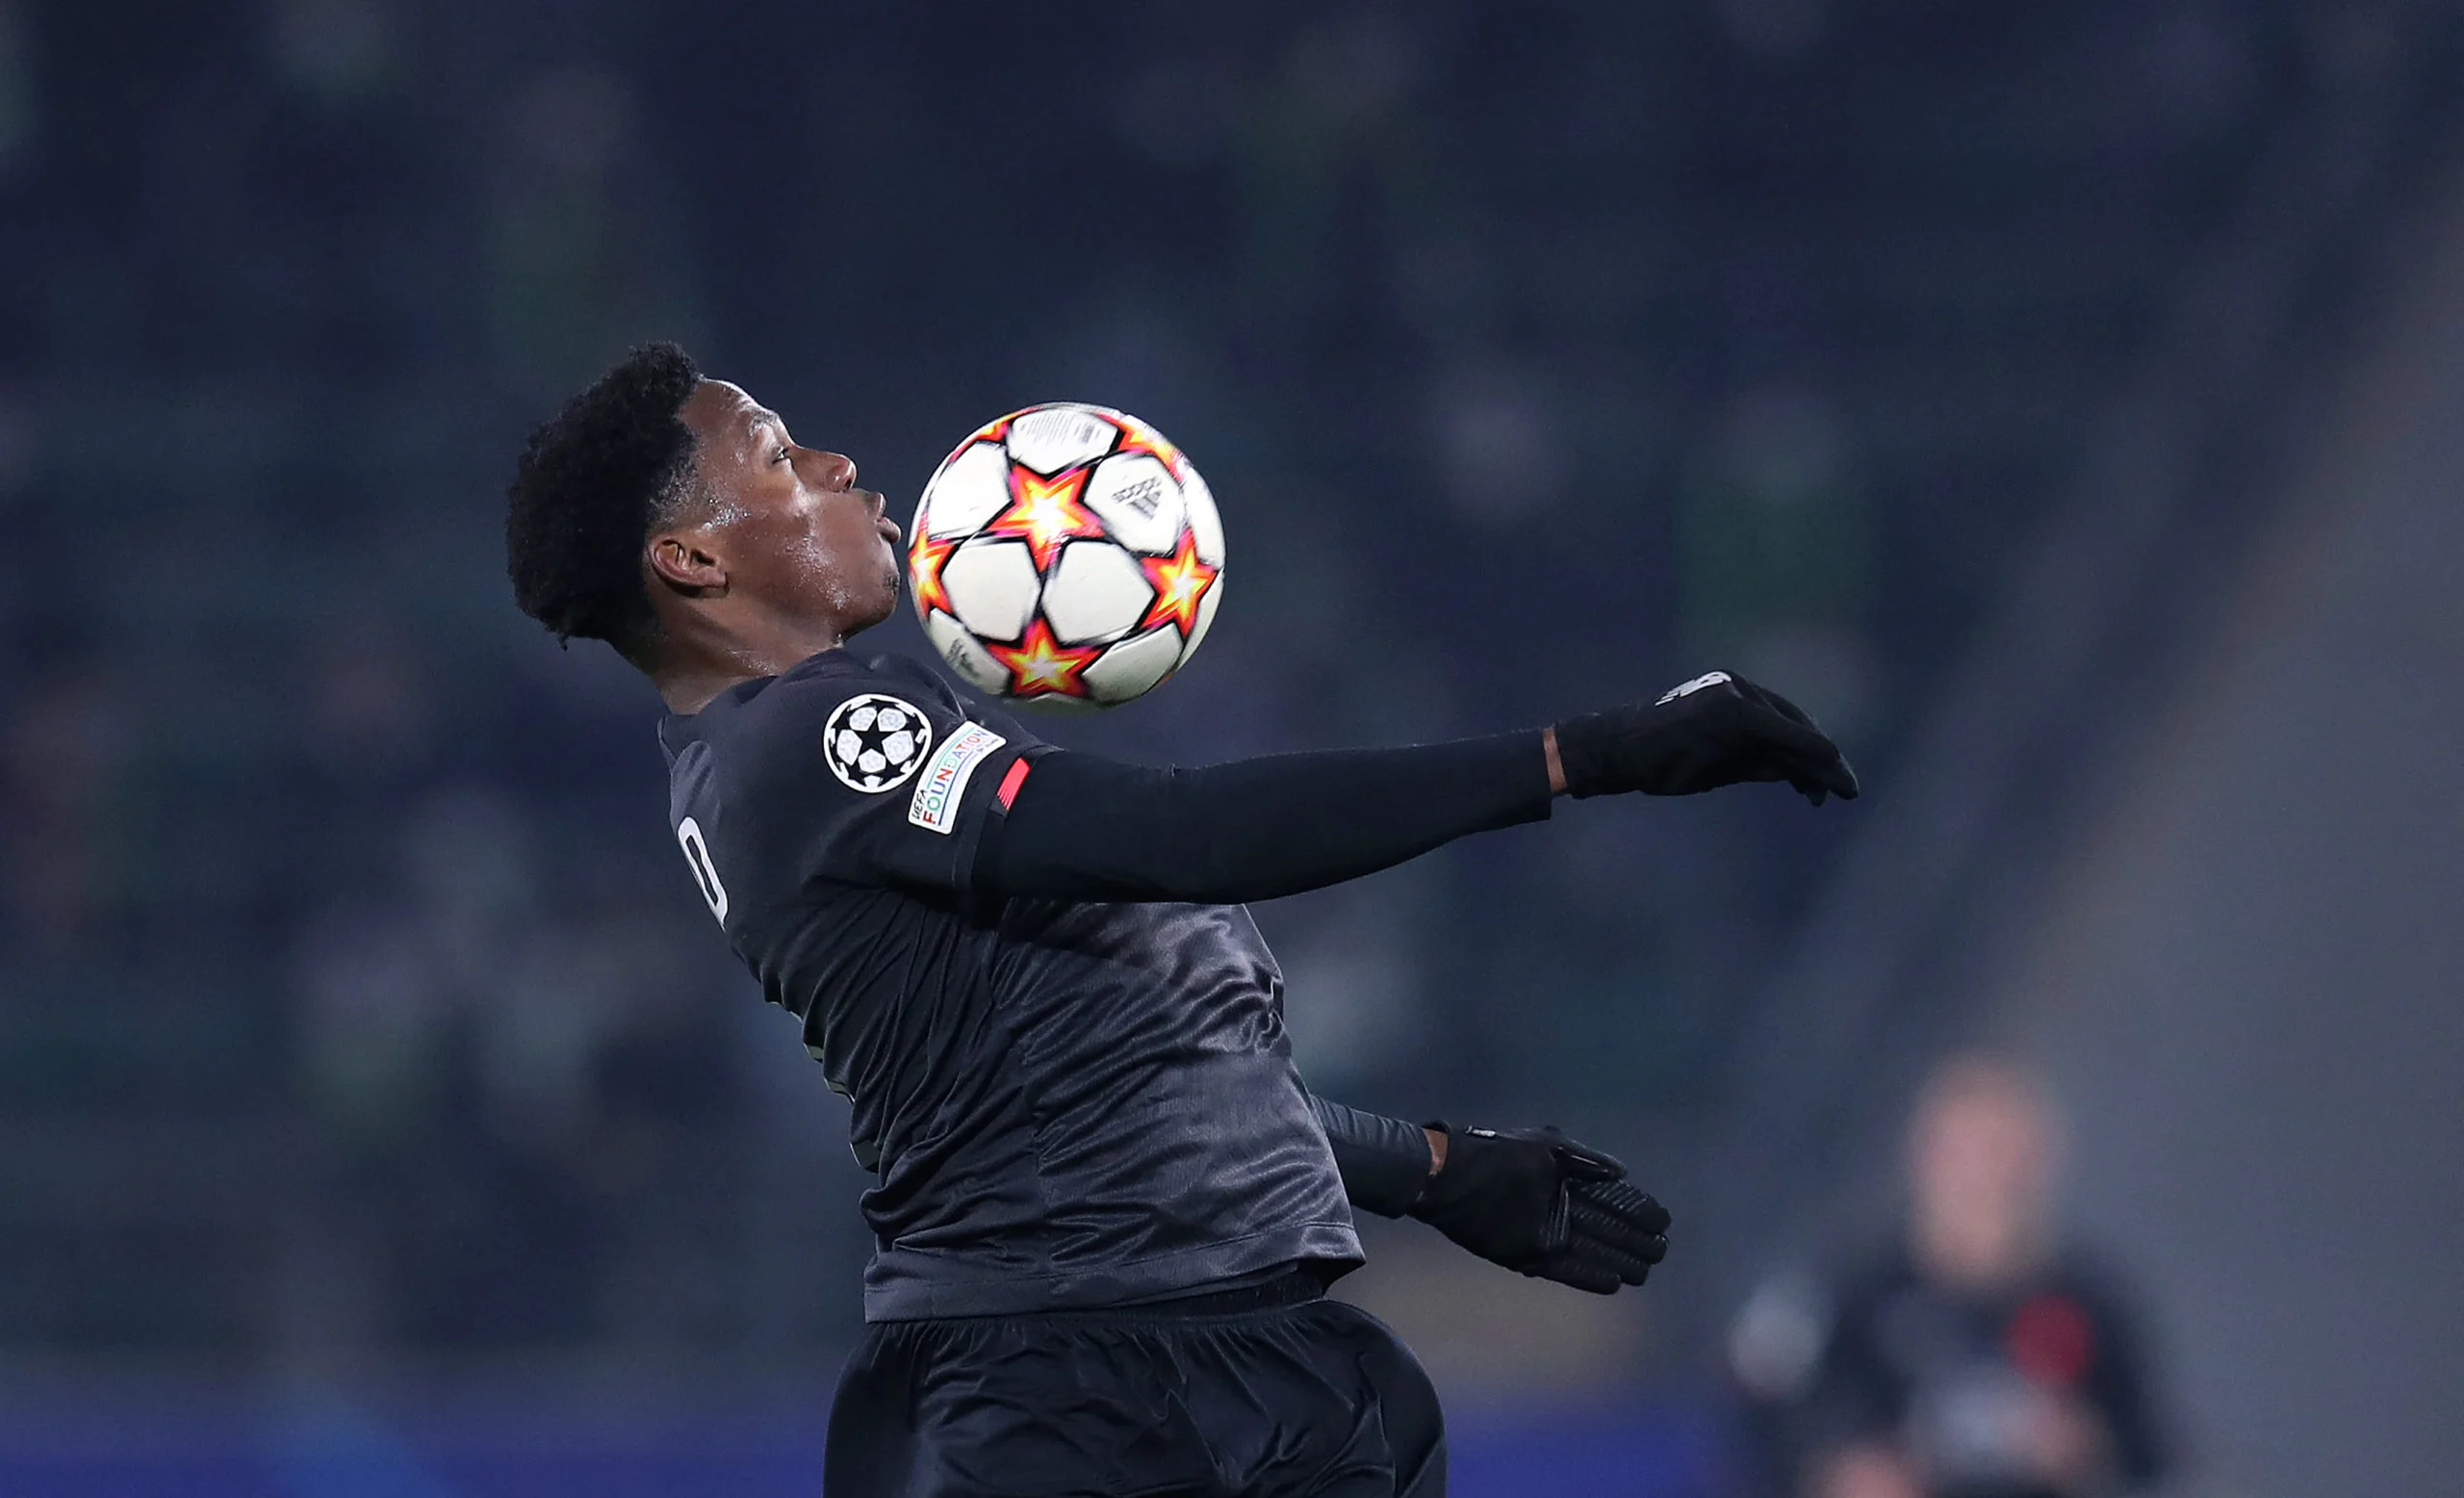 Milan will not stop at Divock Origi to bolster their attack ahead of next season. The takeover will give them ammunition for a pair of purchases.